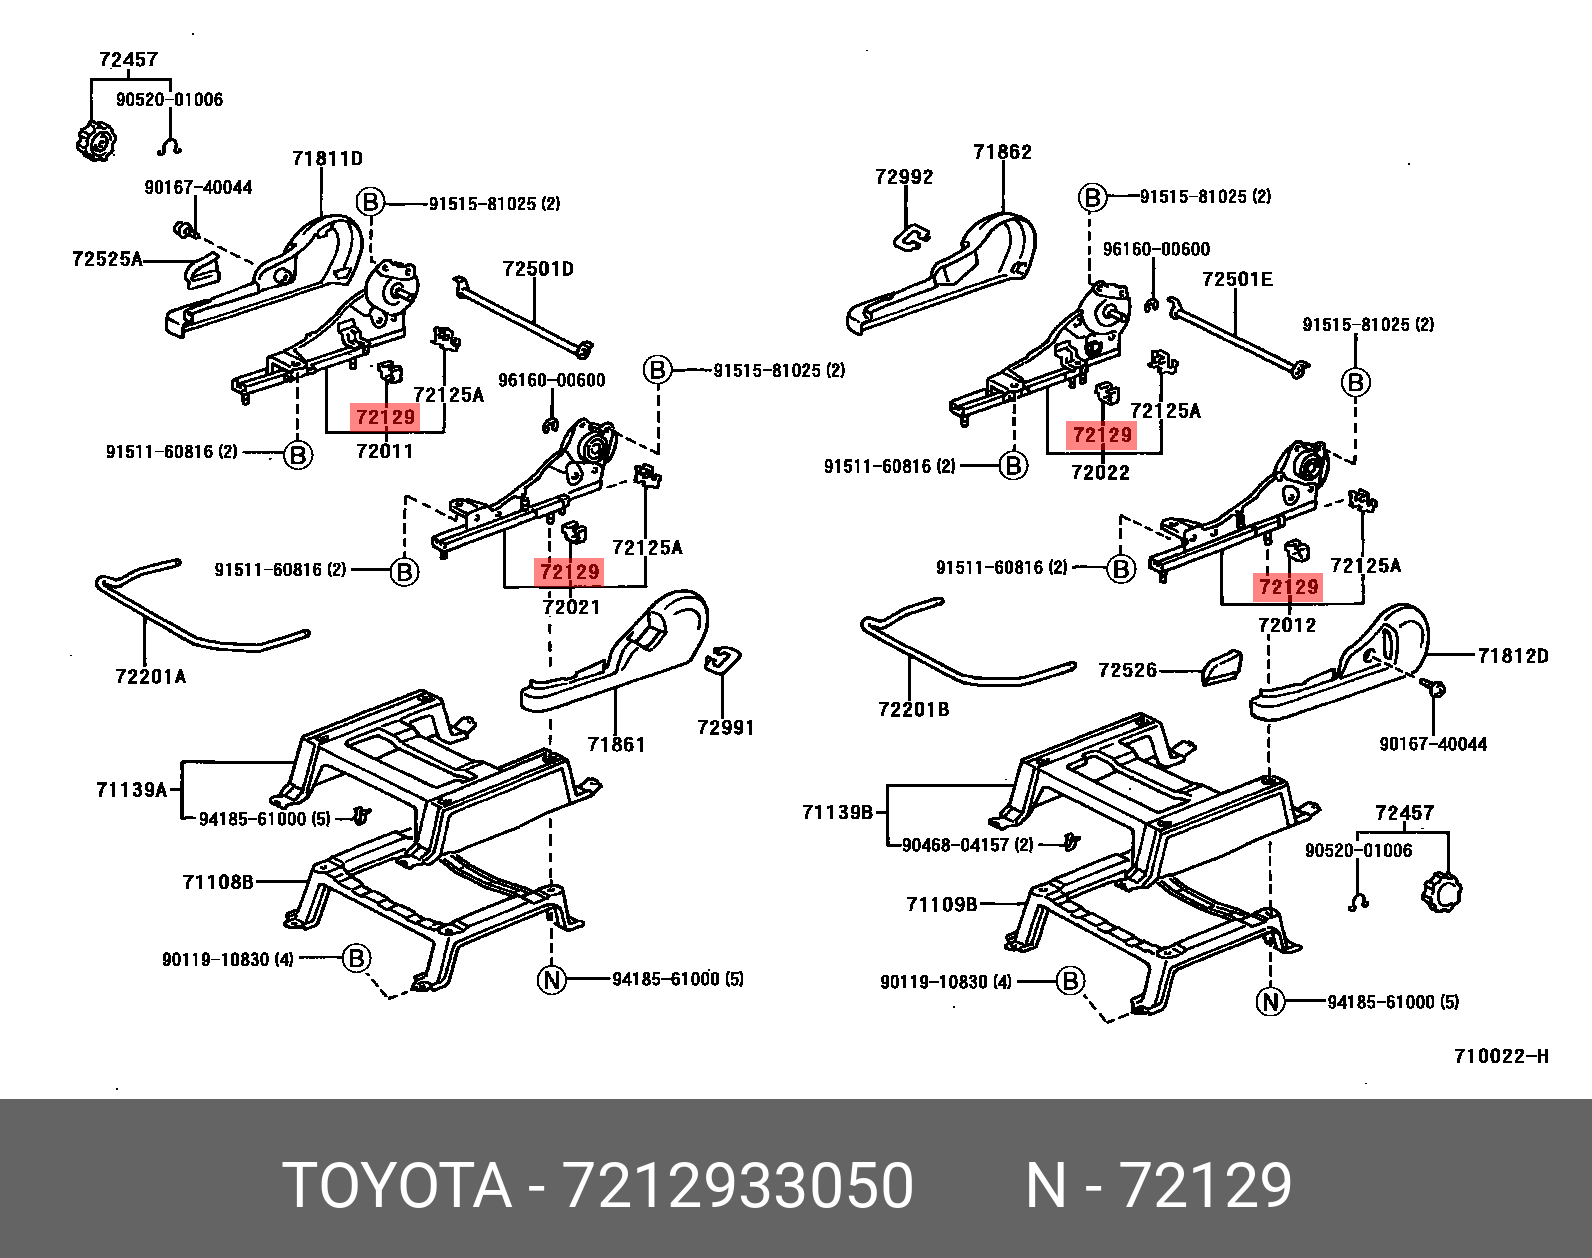 CAMRY 200109 - 200601, PROTECTOR, SEAT TRACK LOWER RAIL, NO.1